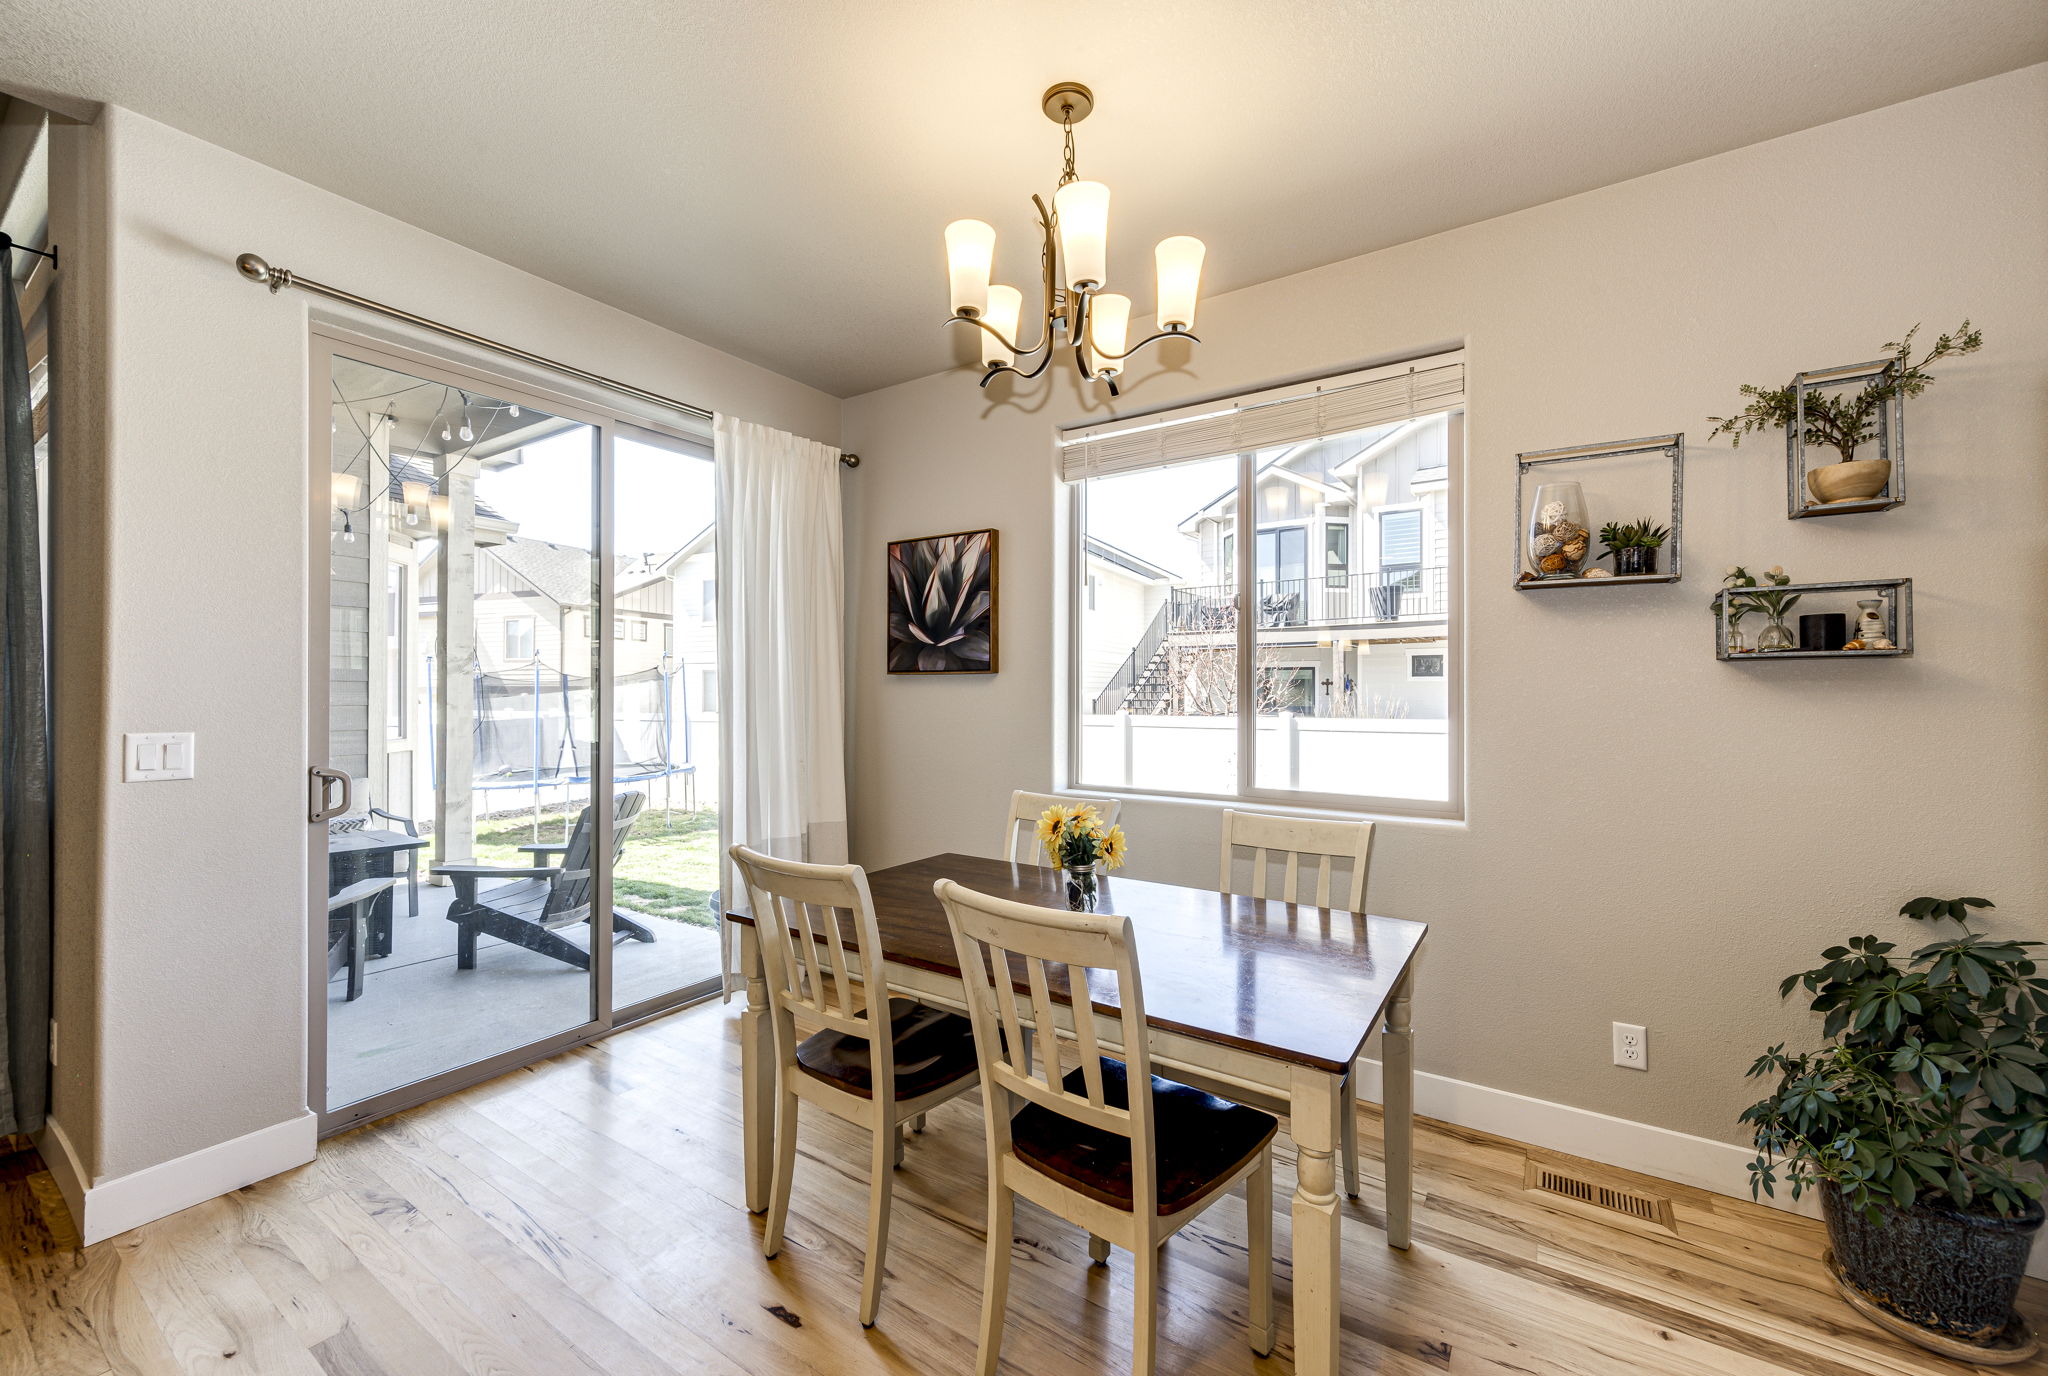 Eat-in space off of the kitchen with patio doors leading out onto your backyard covered deck area